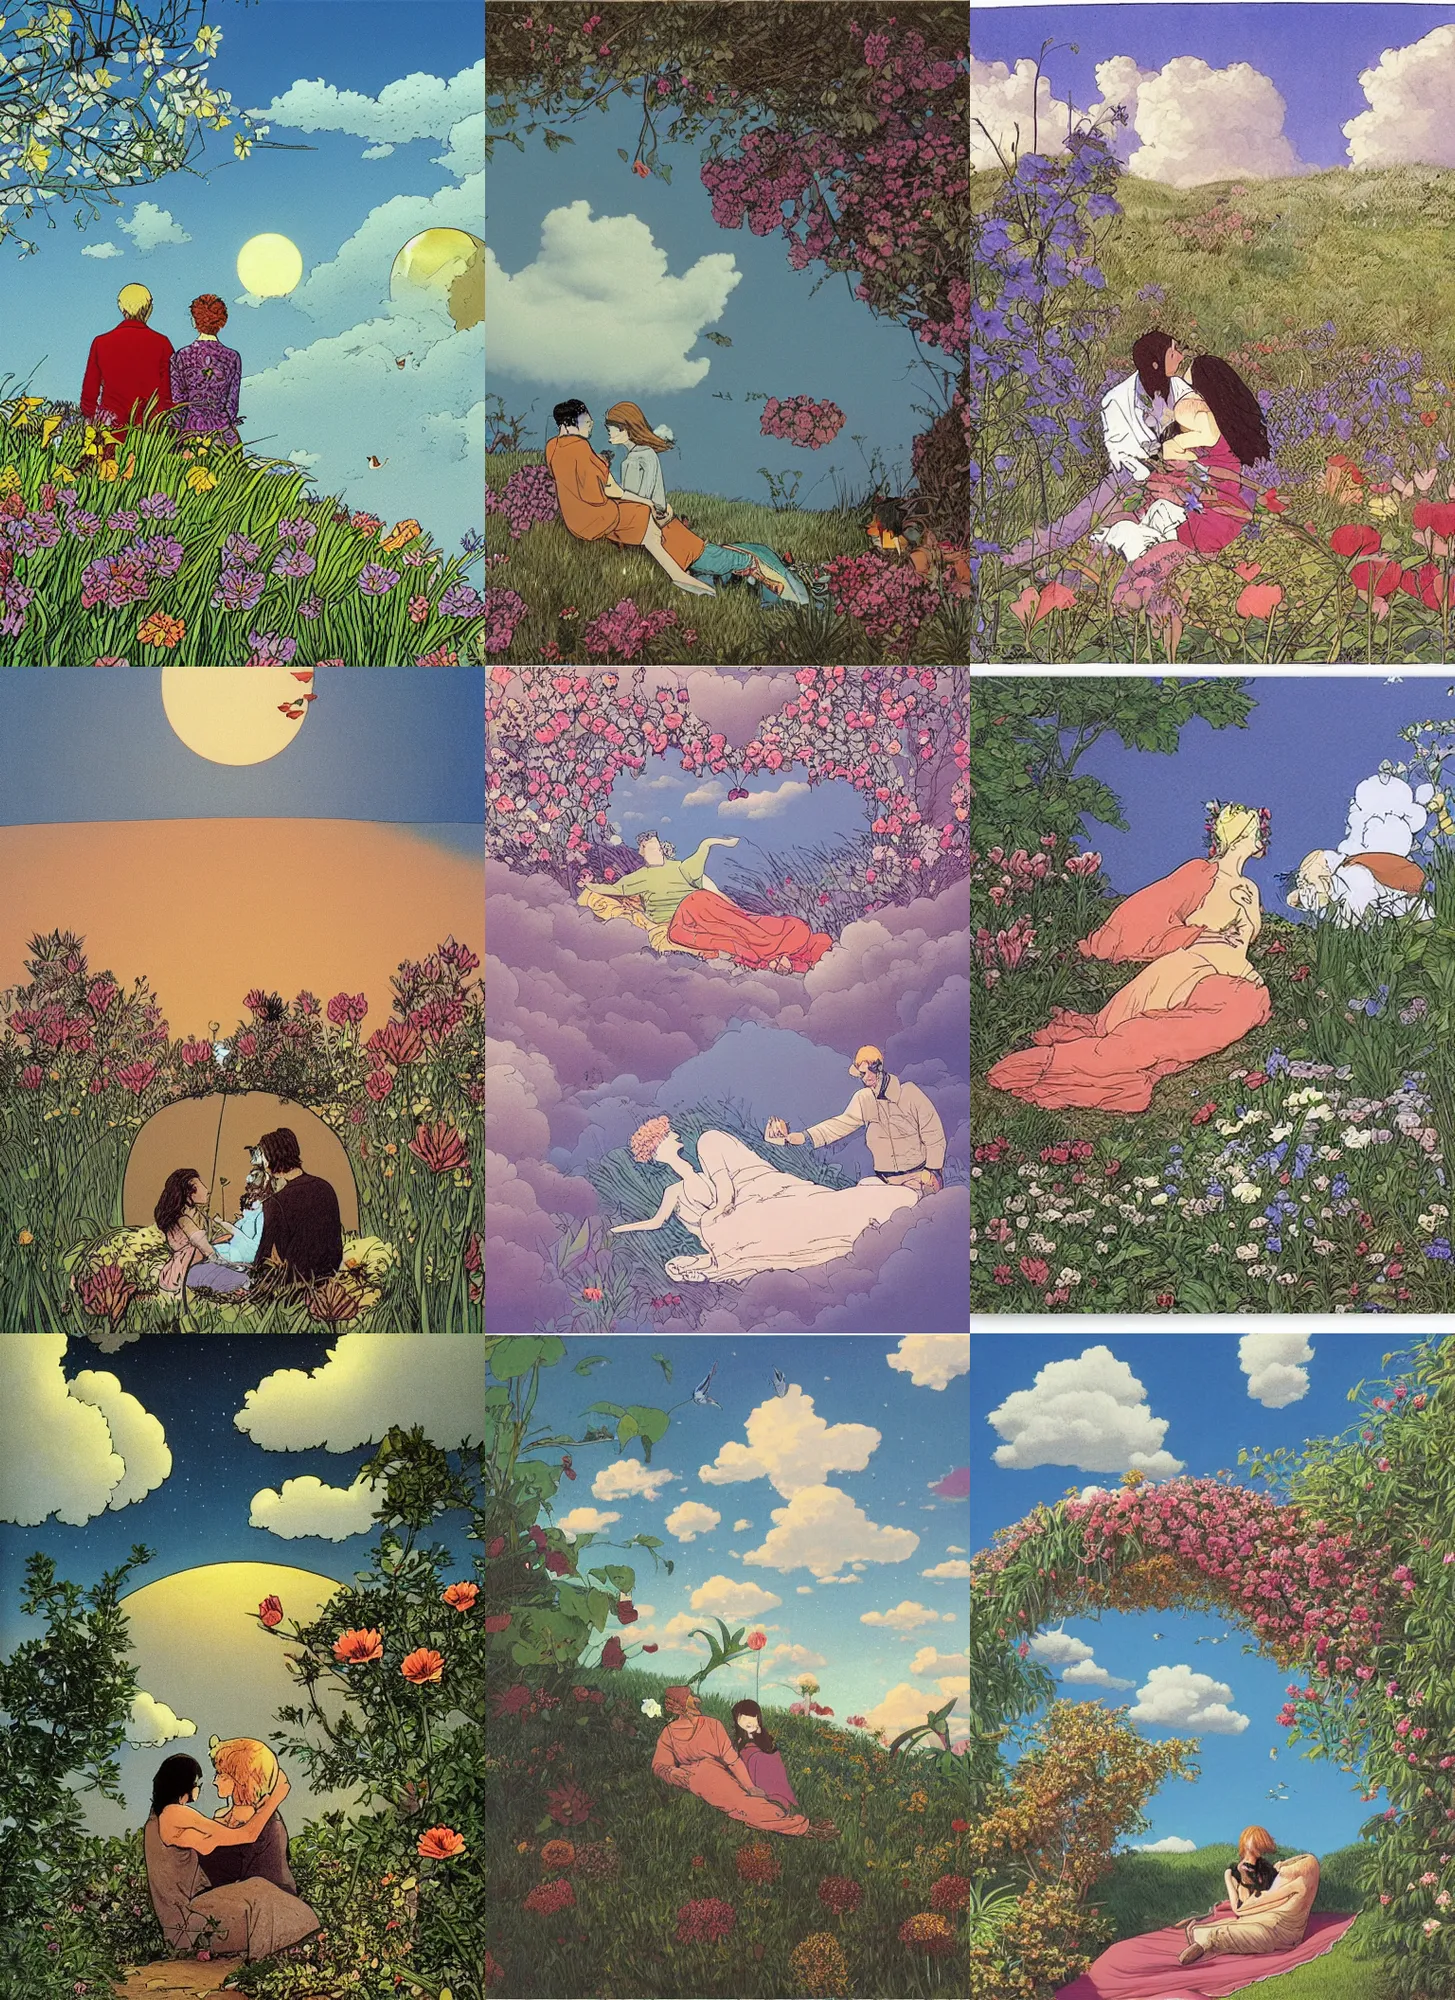 Prompt: picnin scene in nature, couple in love, flowers, clouds, a sleeping cat, by moebius